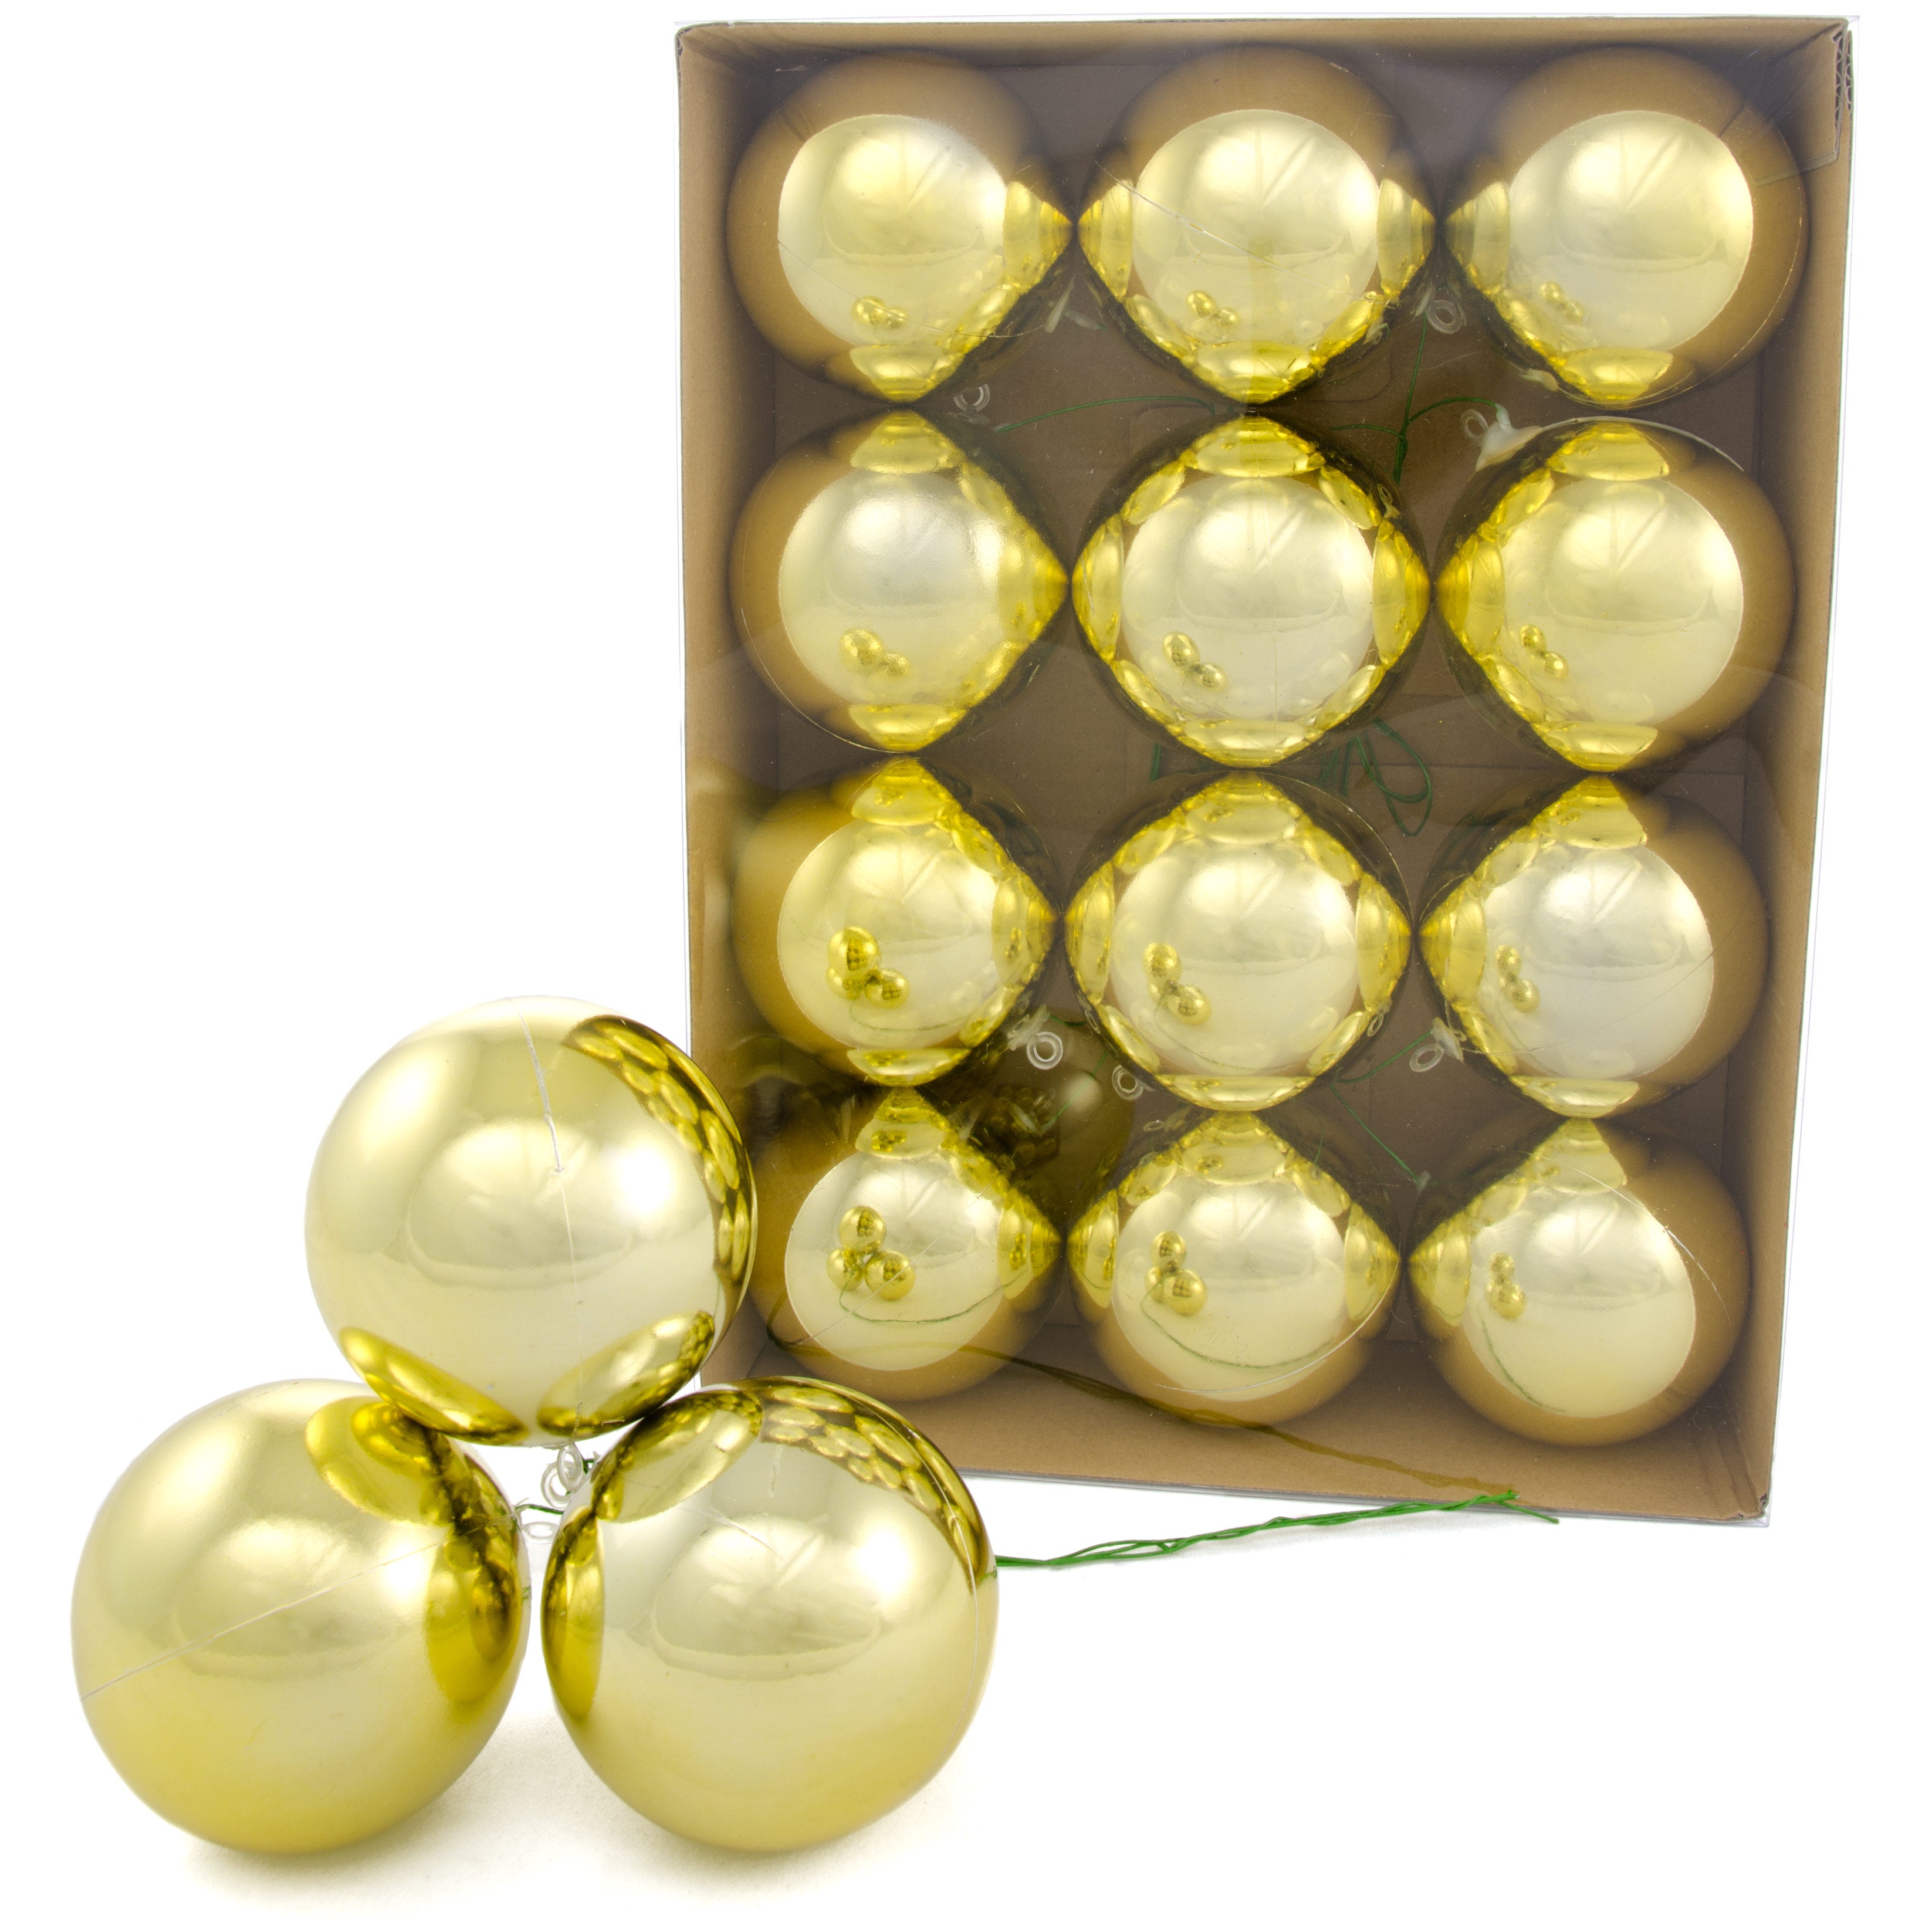 70MM Metallic Ball Ornament On Wire: Gold (12)